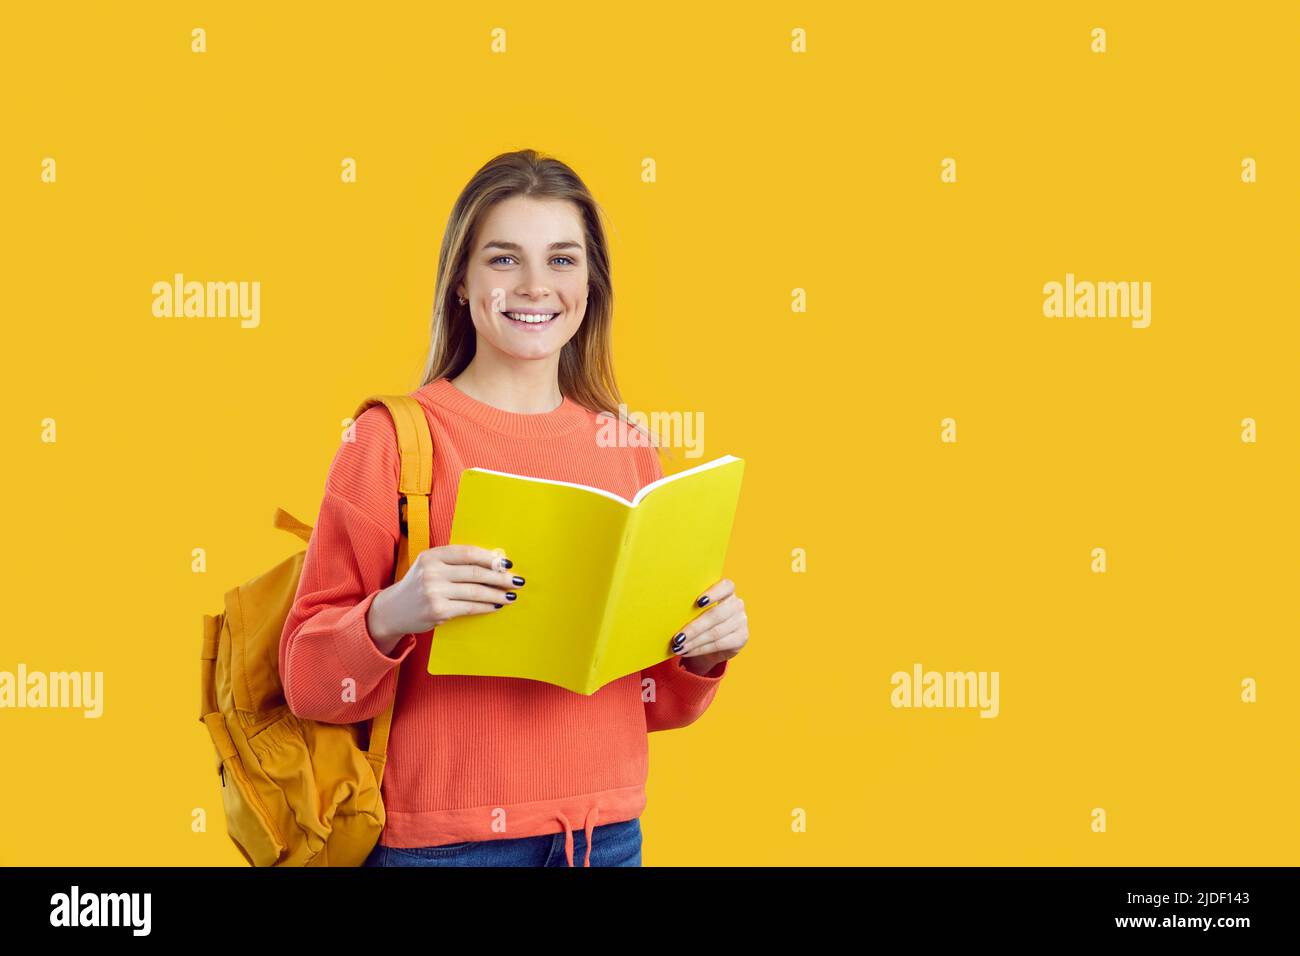 Portrait of smiling female student with backpack and textbook isolated on yellow background. Stock Photo